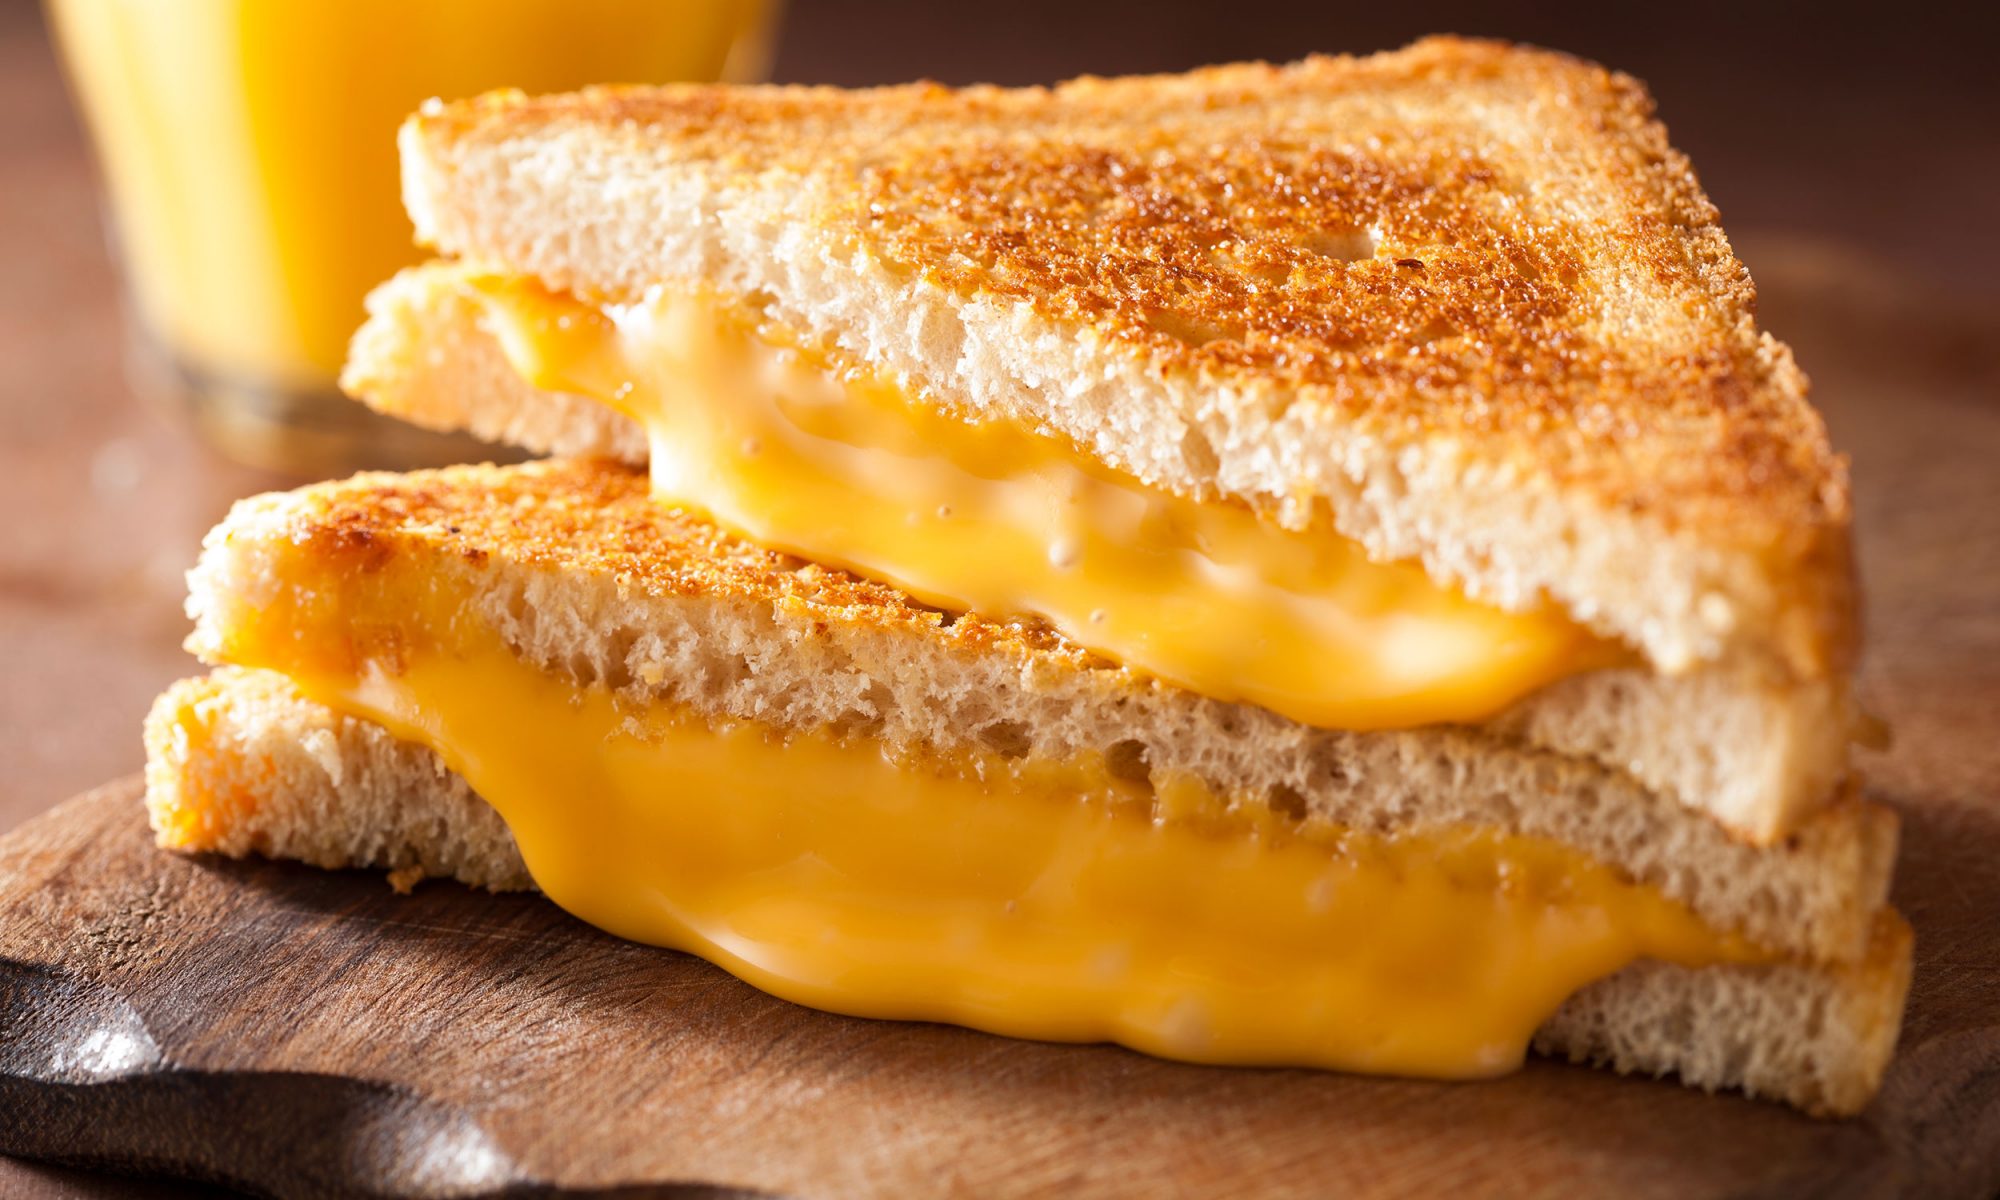 EC: Why Some Cheeses Melt Better Than Others, According to Science